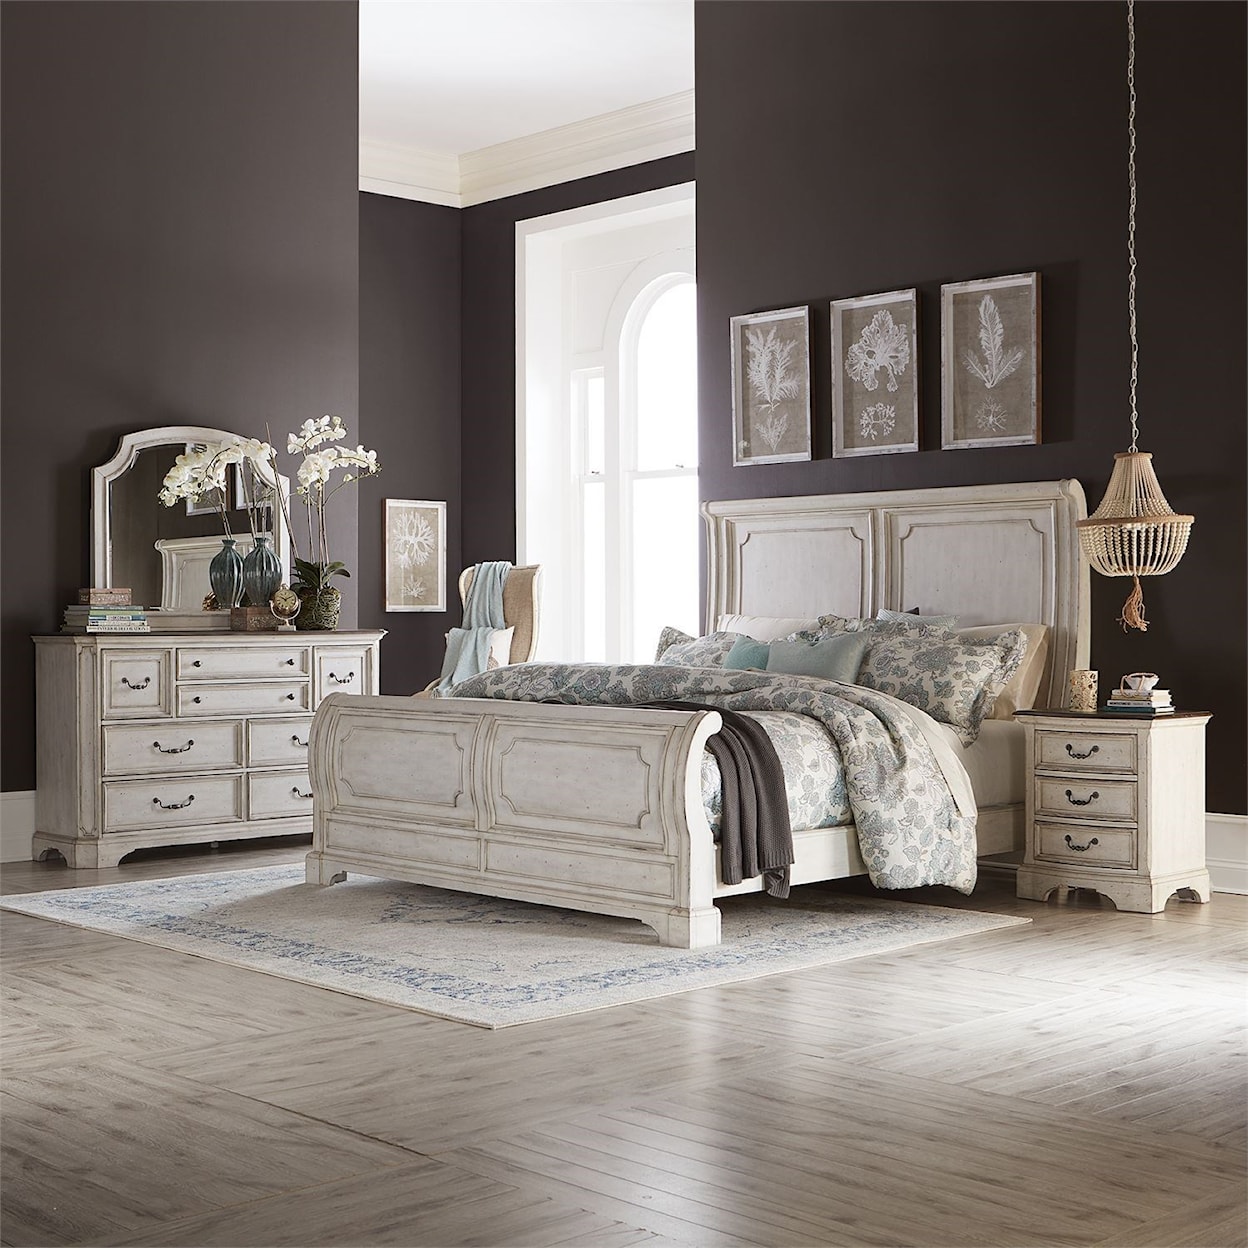 Liberty Furniture Abbey Road King Bedroom Group